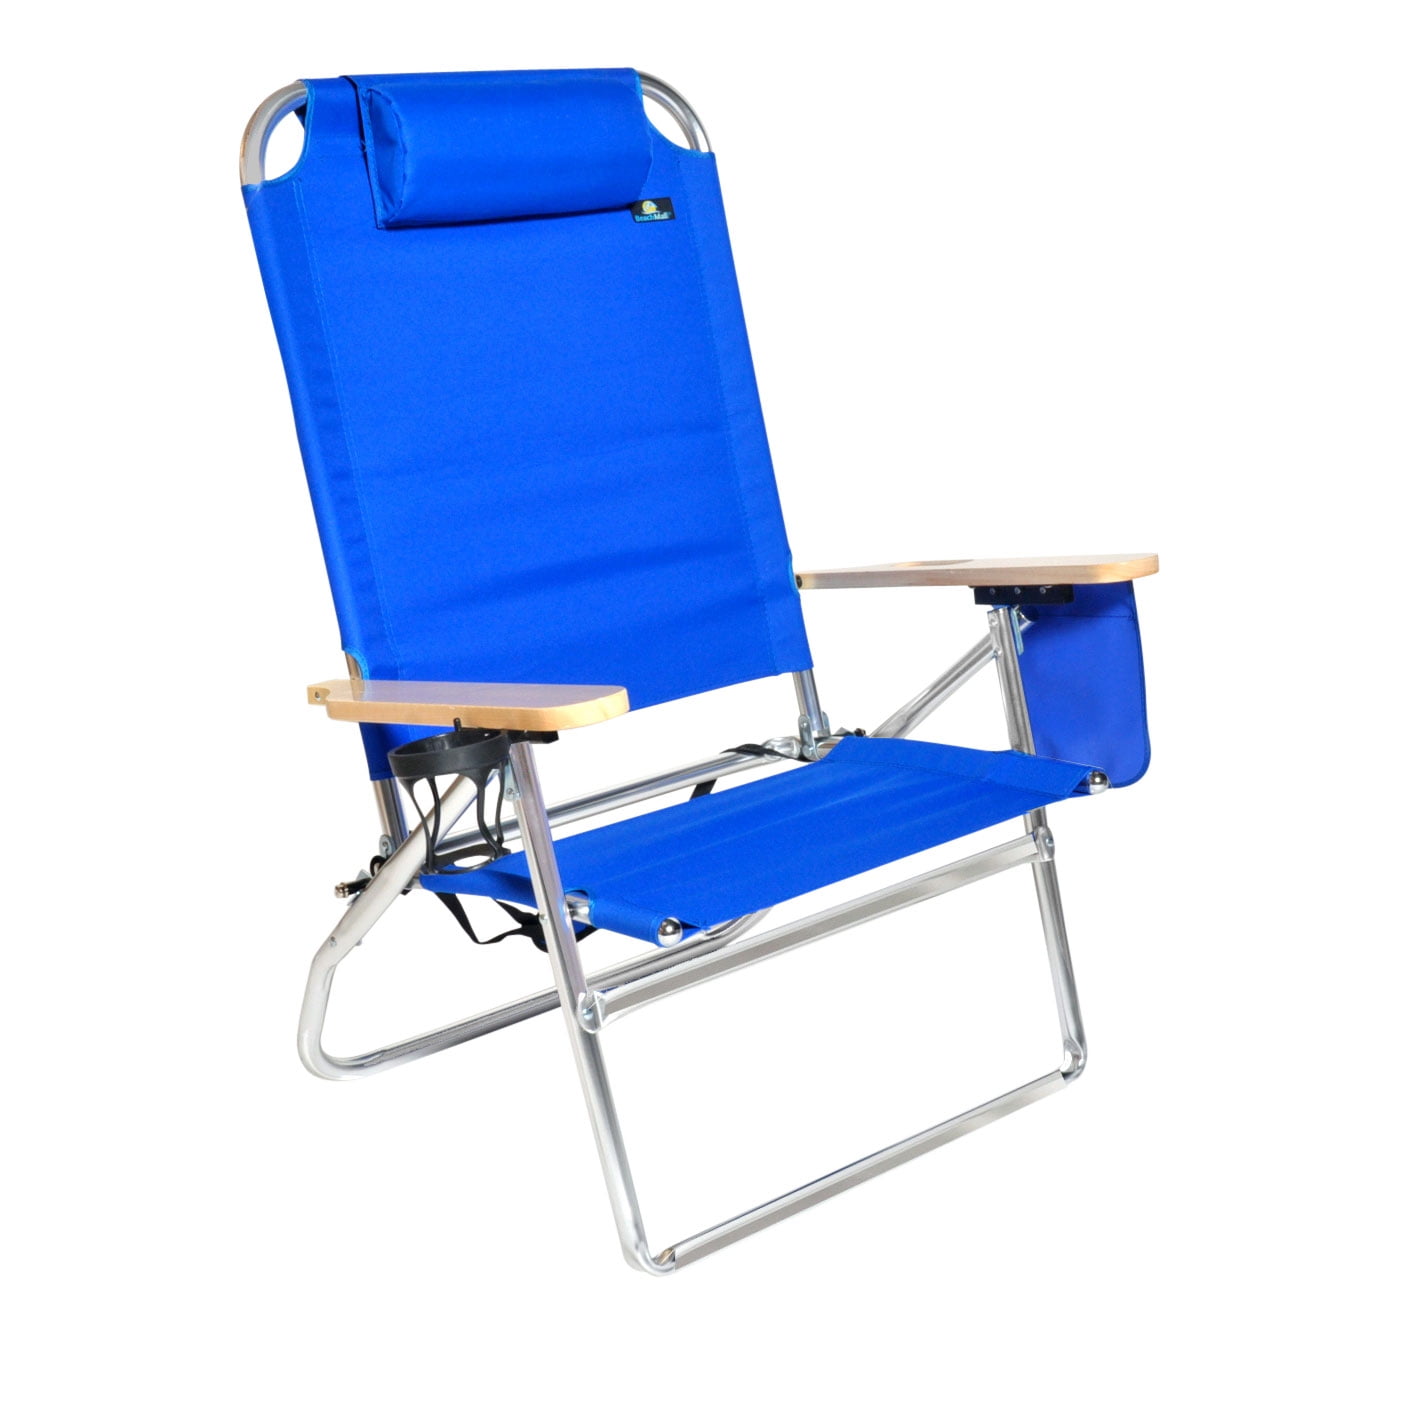  5 Position Beach Chair With Cup Holder for Large Space